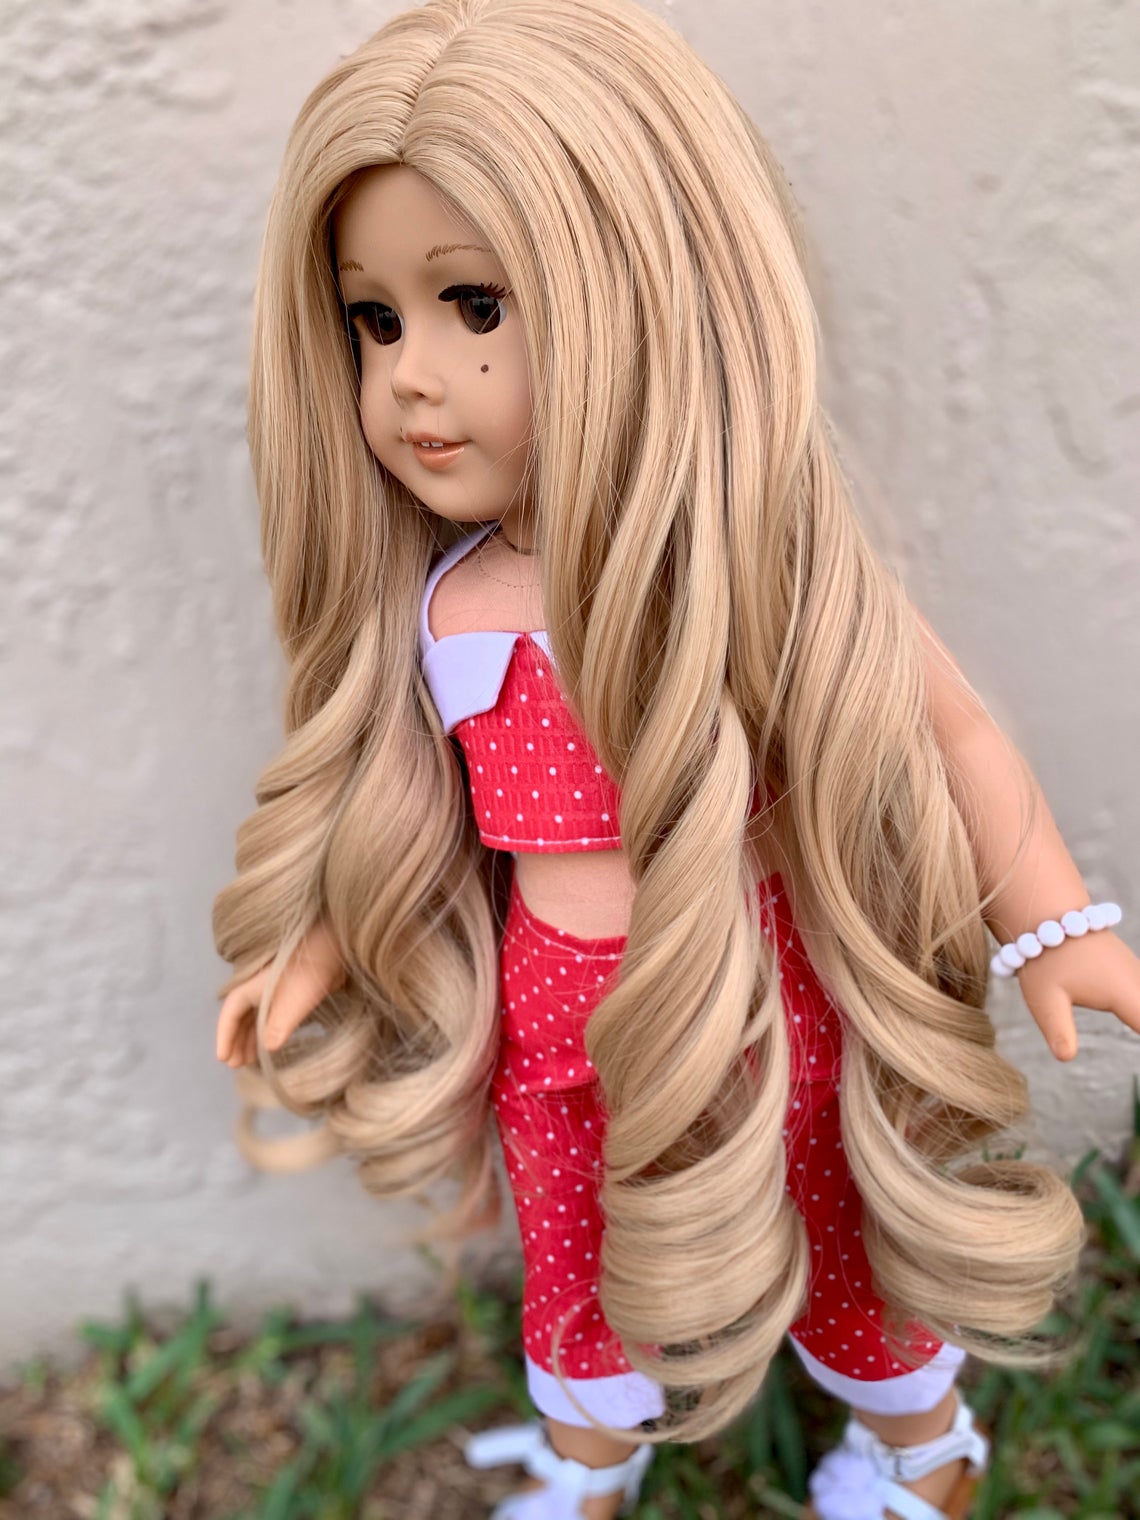 Zazou Dolls Exclusive Princess Honey WIG for 18 Inch dolls such as Our Generation, Journey Girls and American Girl